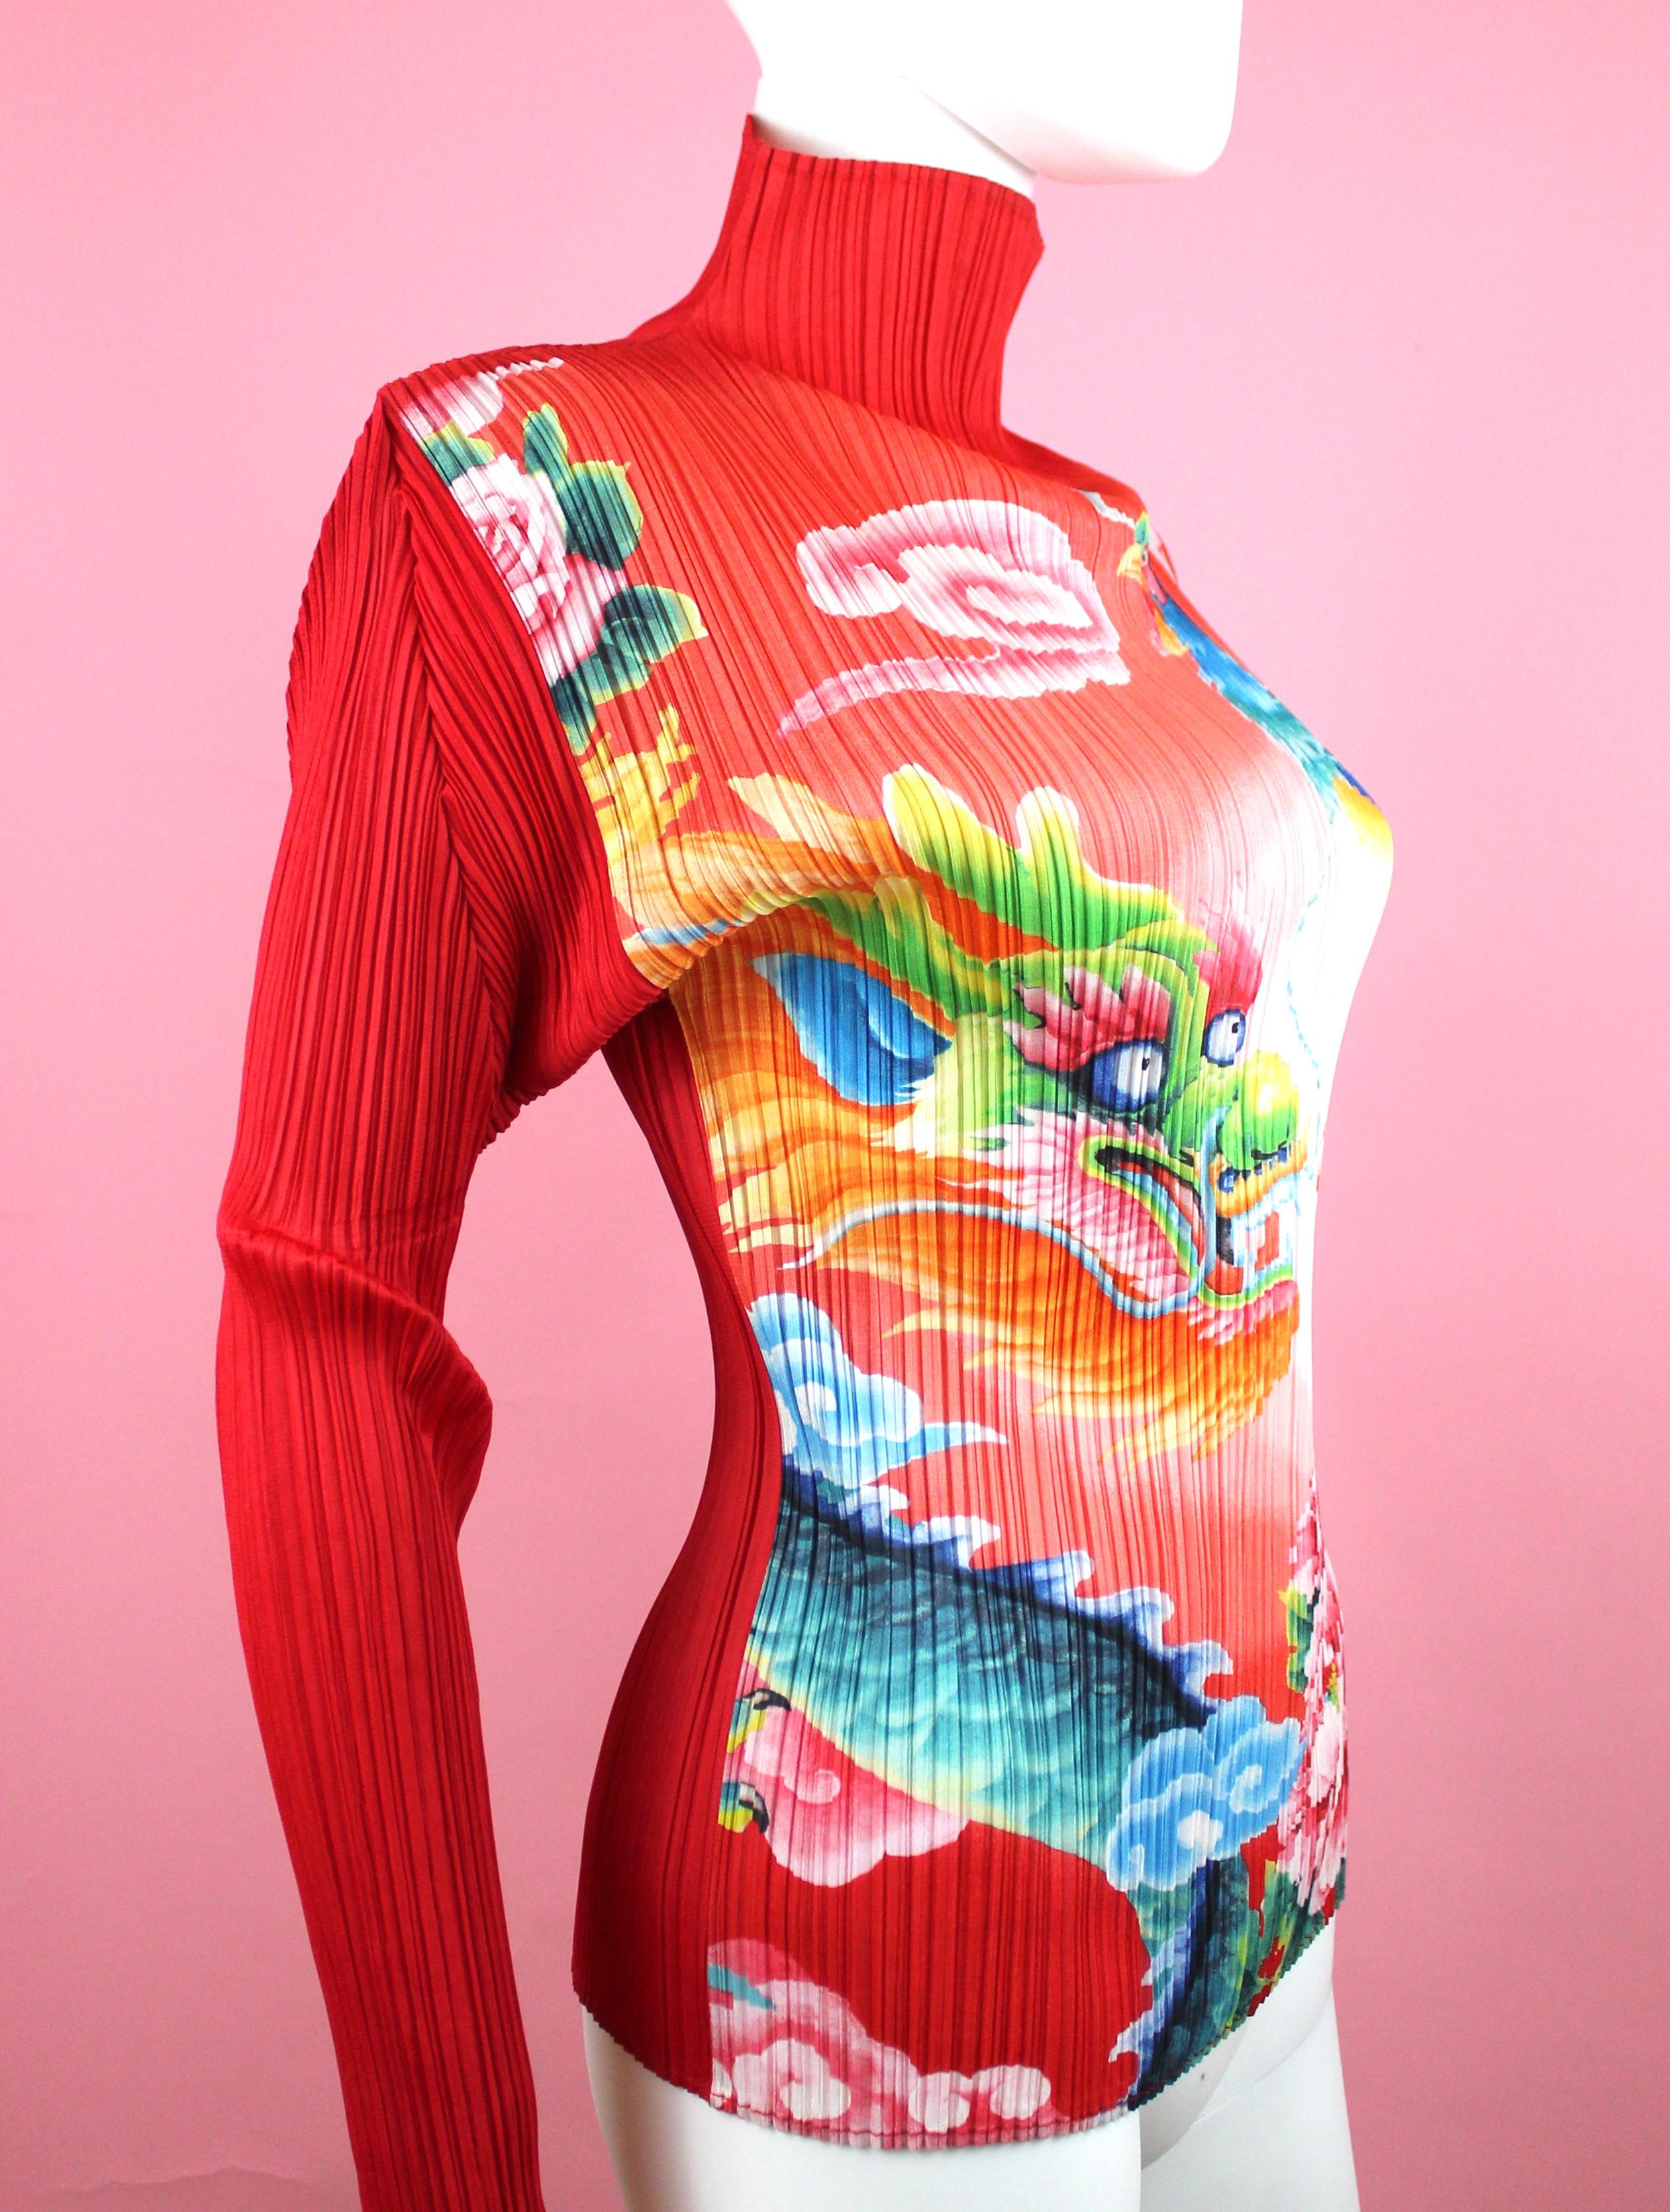 Pleats Please Shirt by Issey Miyake
-Red pleated shirt with Chinese dragon and Pheasant 
-Limited edition print
-Vibrant Chinese red color
-Sized Japanese 4, equivalent to M/L
-Made in Japan
-Lots of stretch

Measurements
-Total length: 26